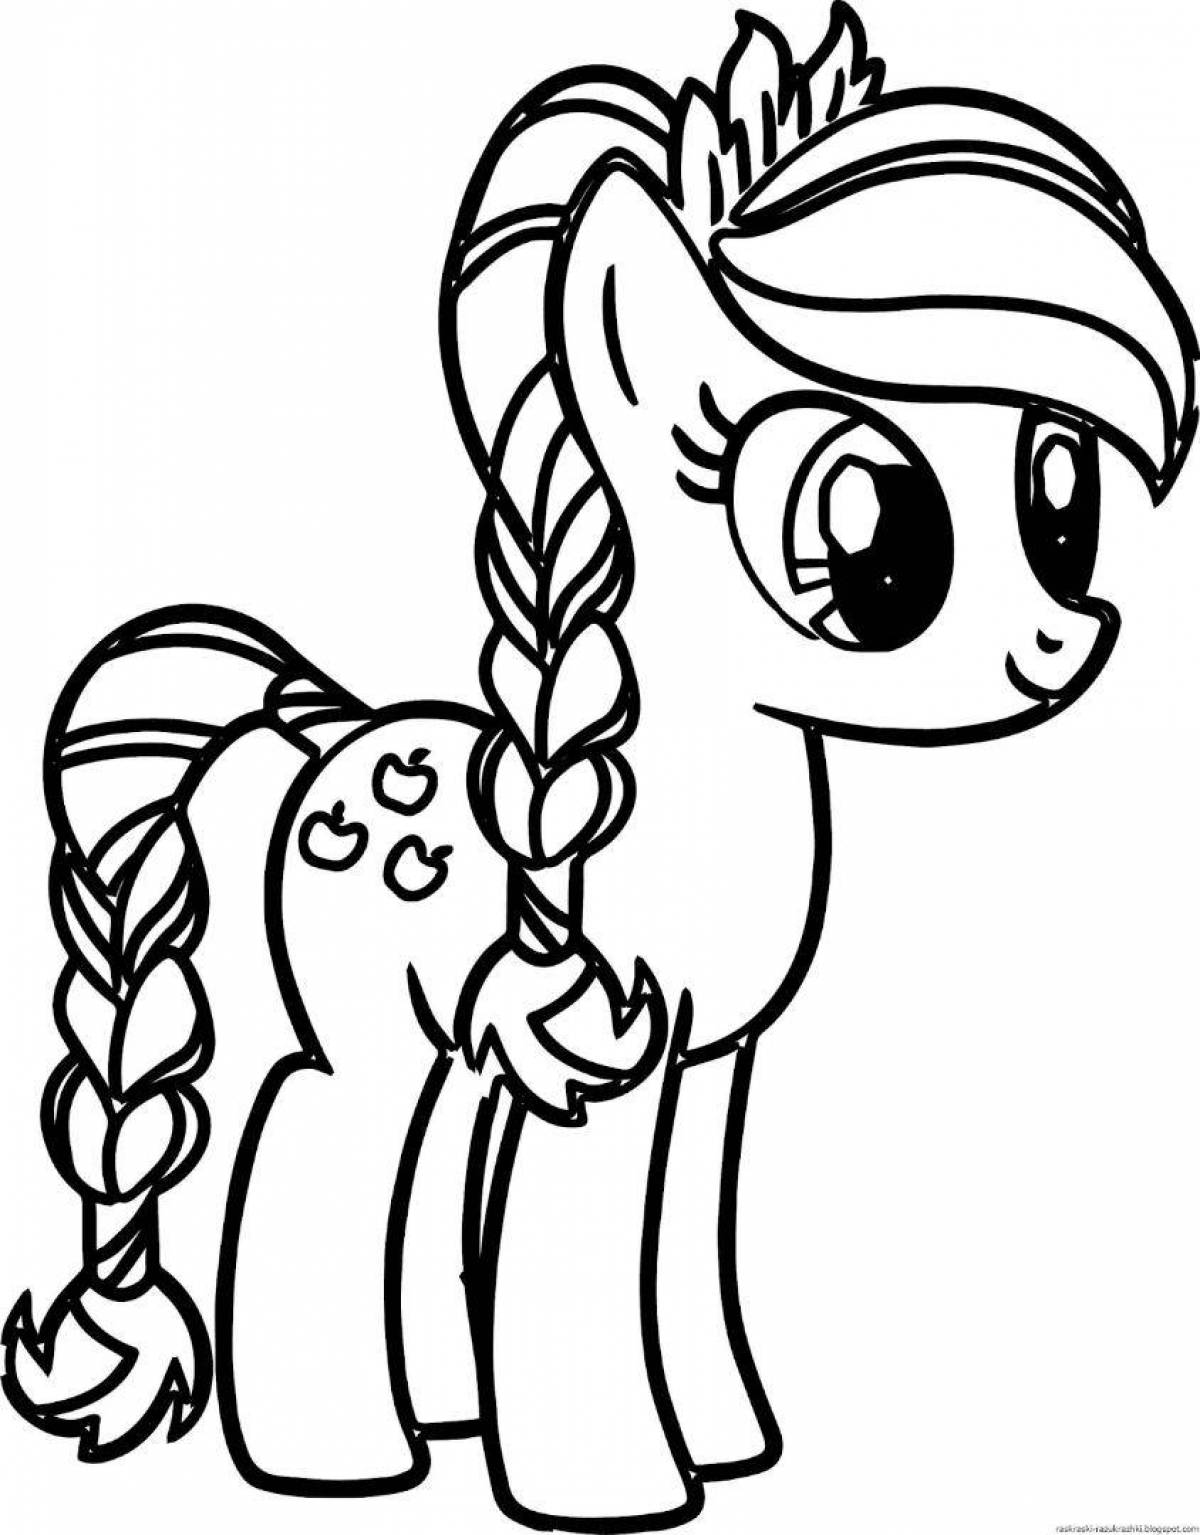 Amazing pony coloring page